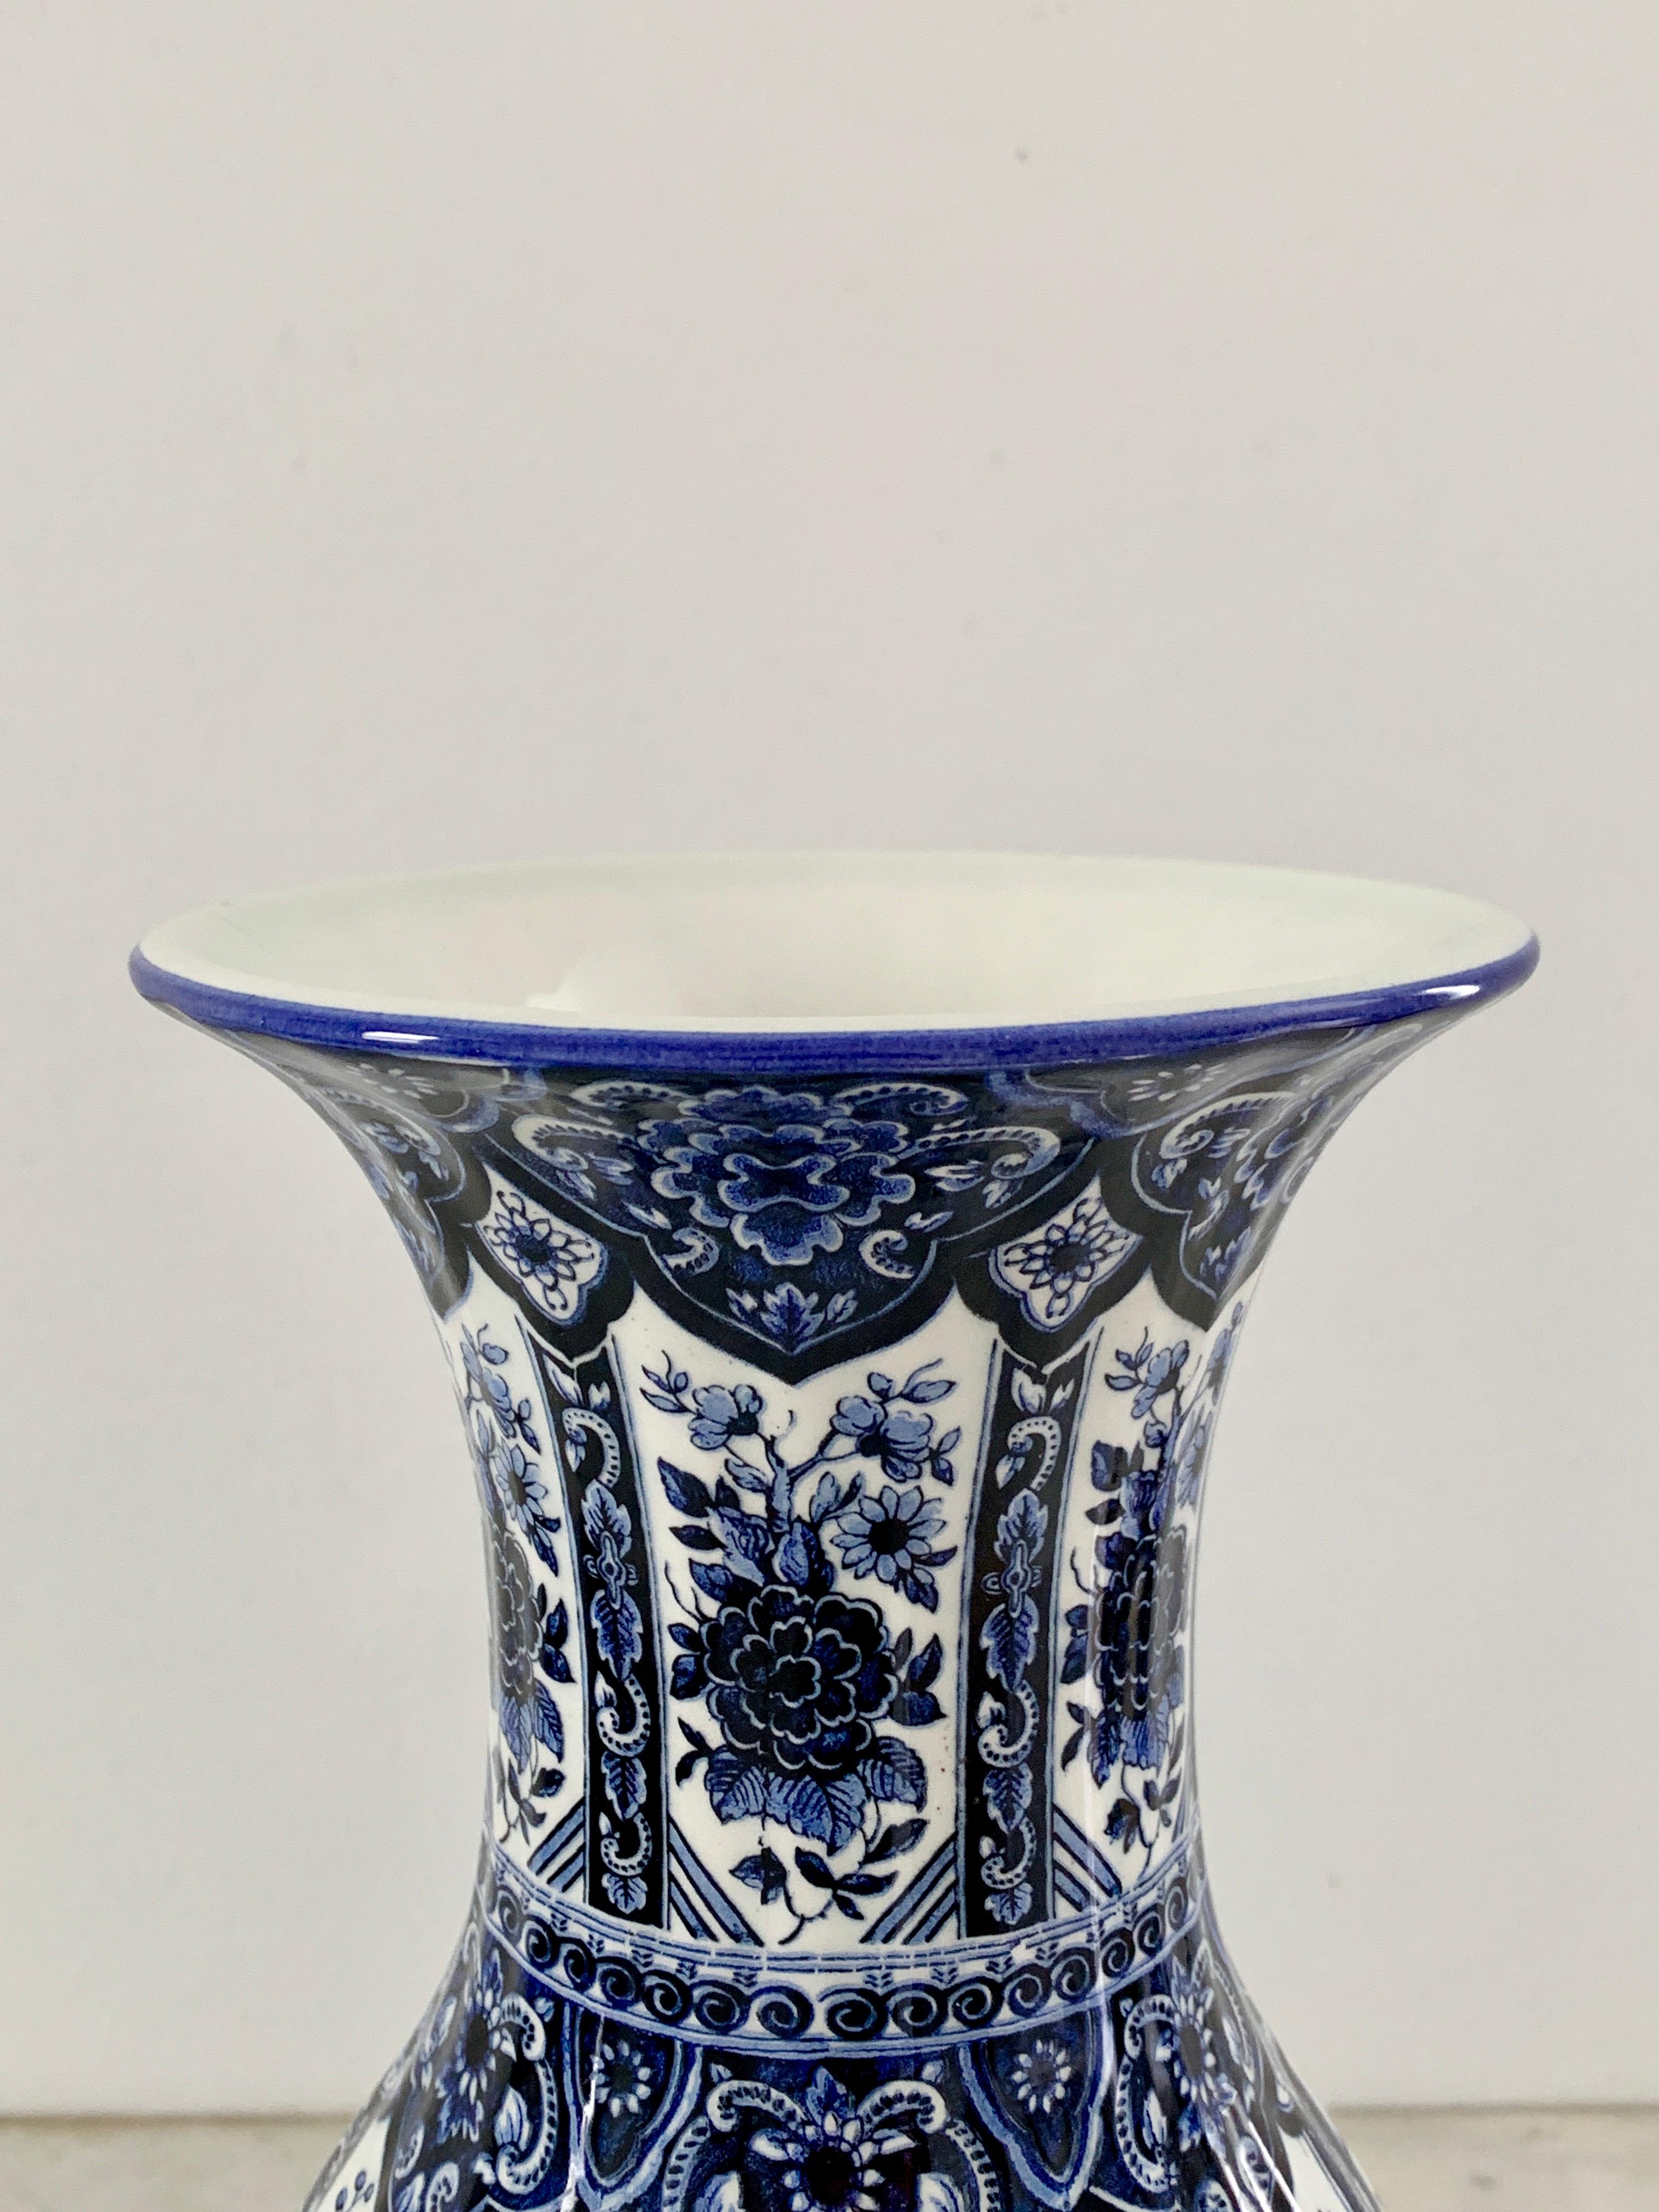 A beautiful Delft Chinoiserie style blue and white porcelain vase

By Ardalt, Blue Delfia

Italy, Mid-20th Century

Measures: 5